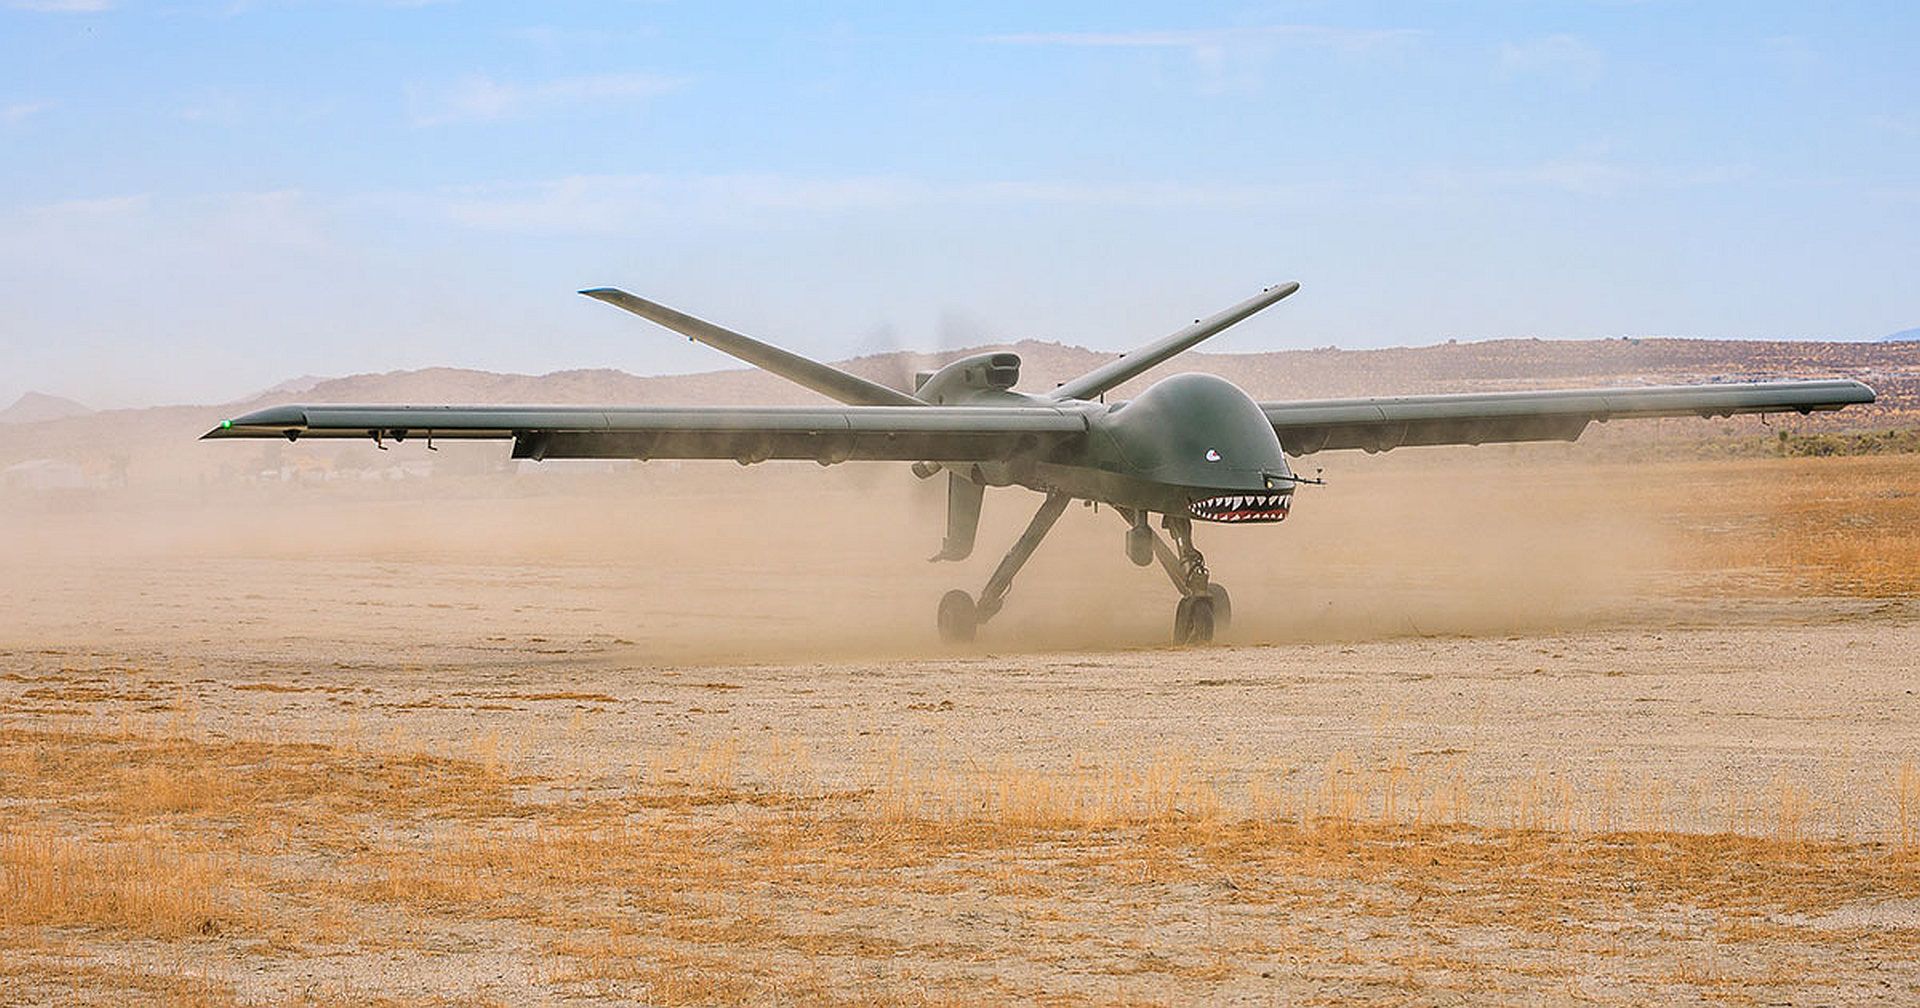 Mojave STOL UAS Completes First Dirt Operation